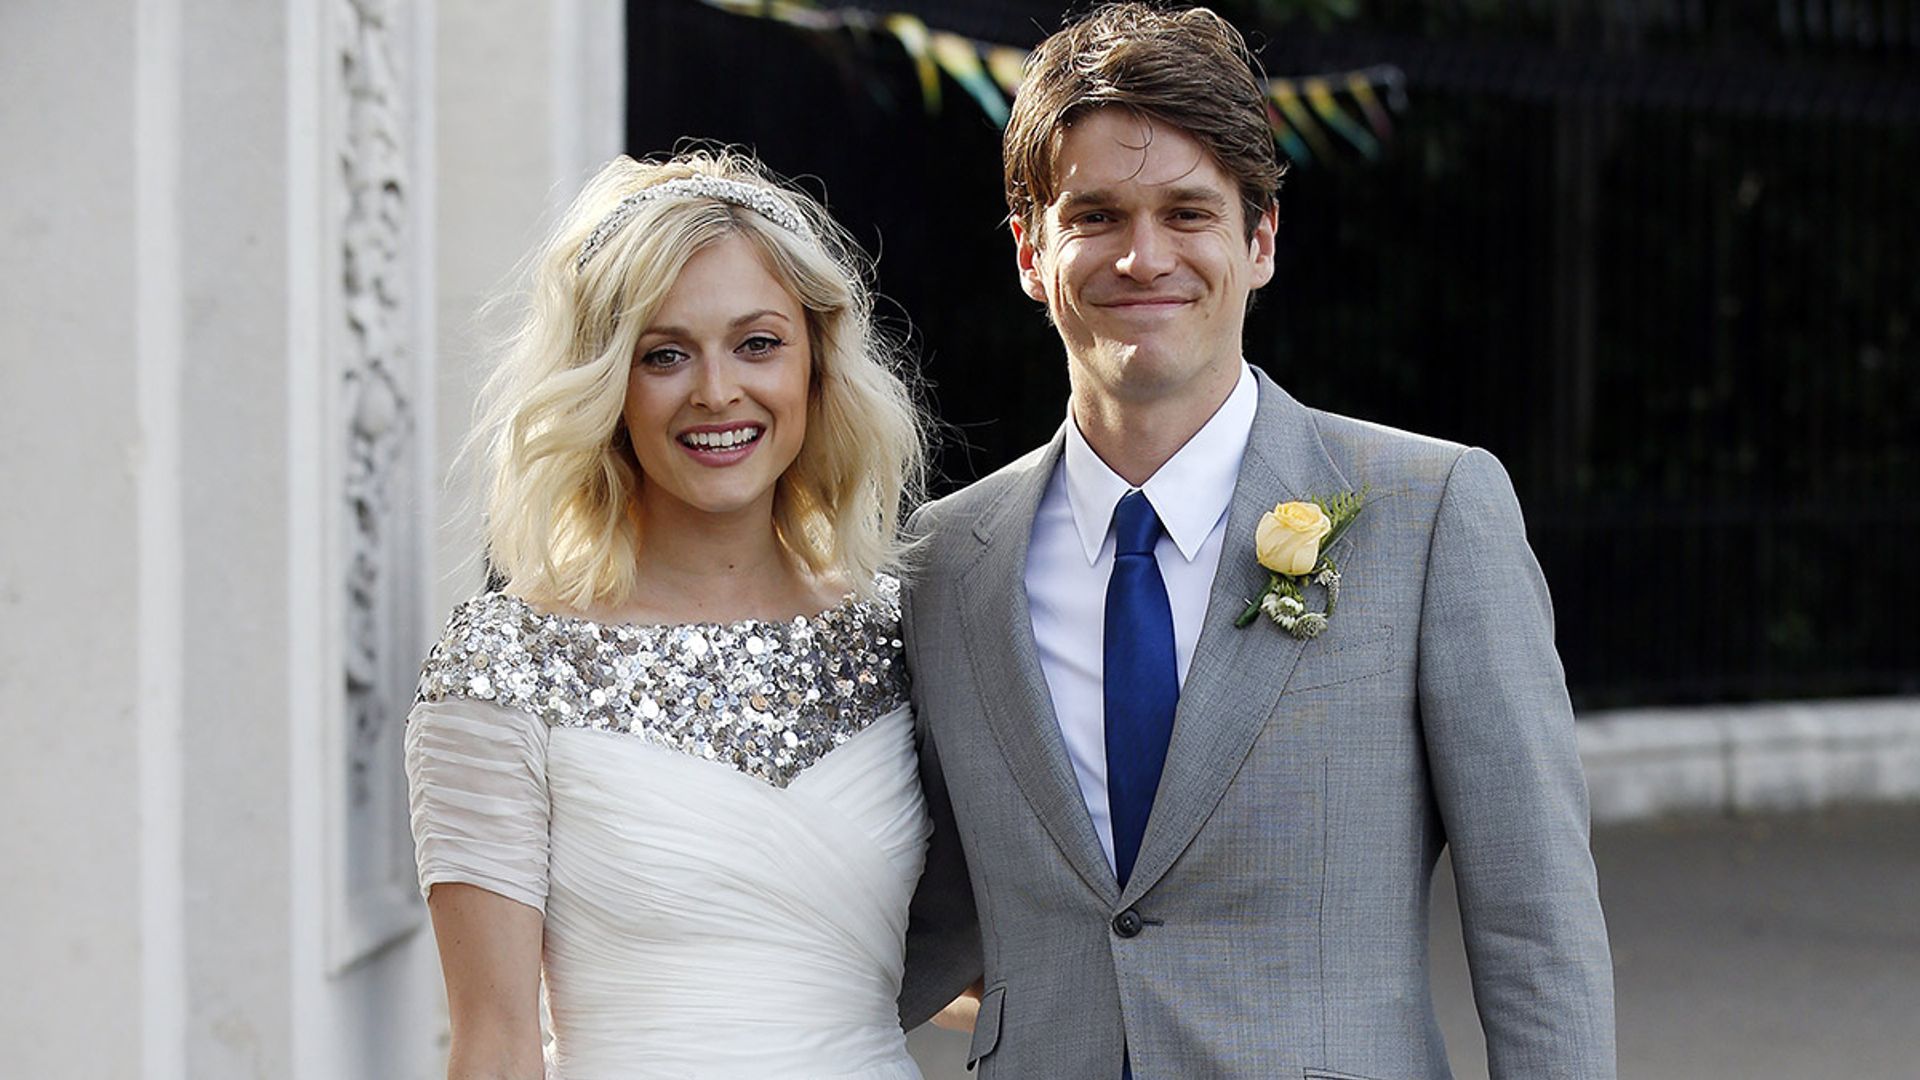 fearne cotton and jesse wood